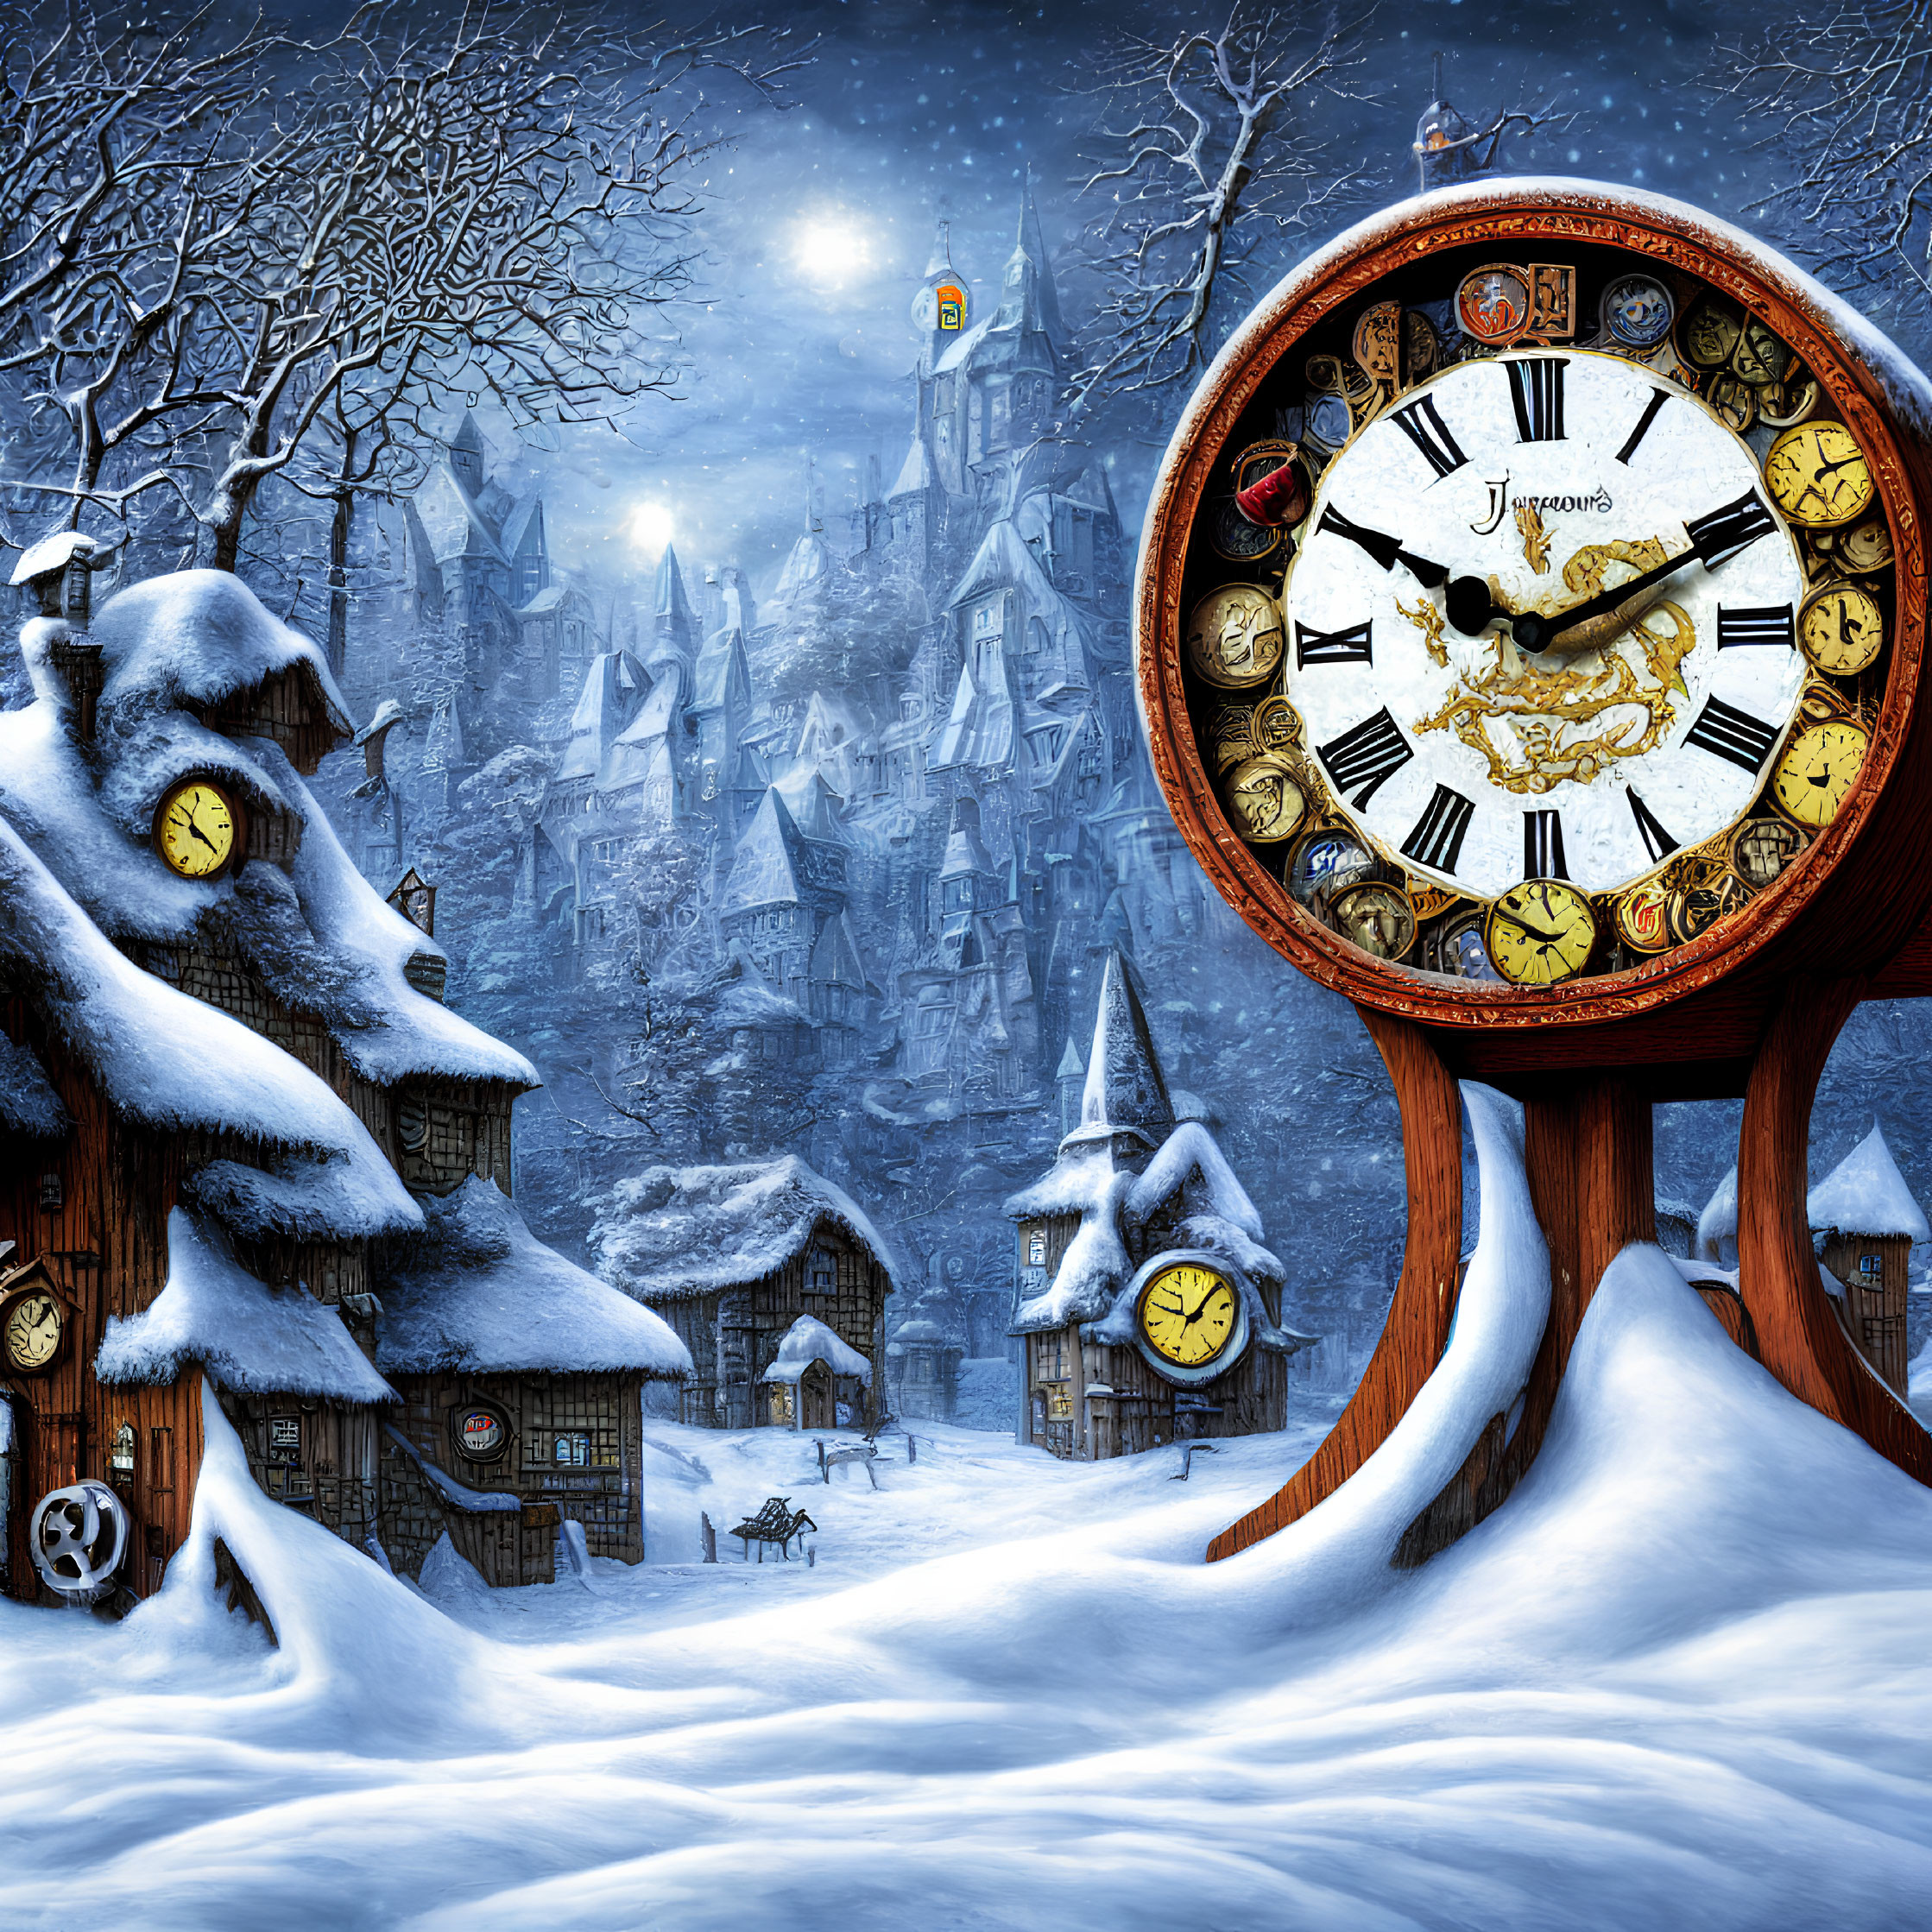 Winter scene with oversized ornate clock, snow-covered cottages, and full moon